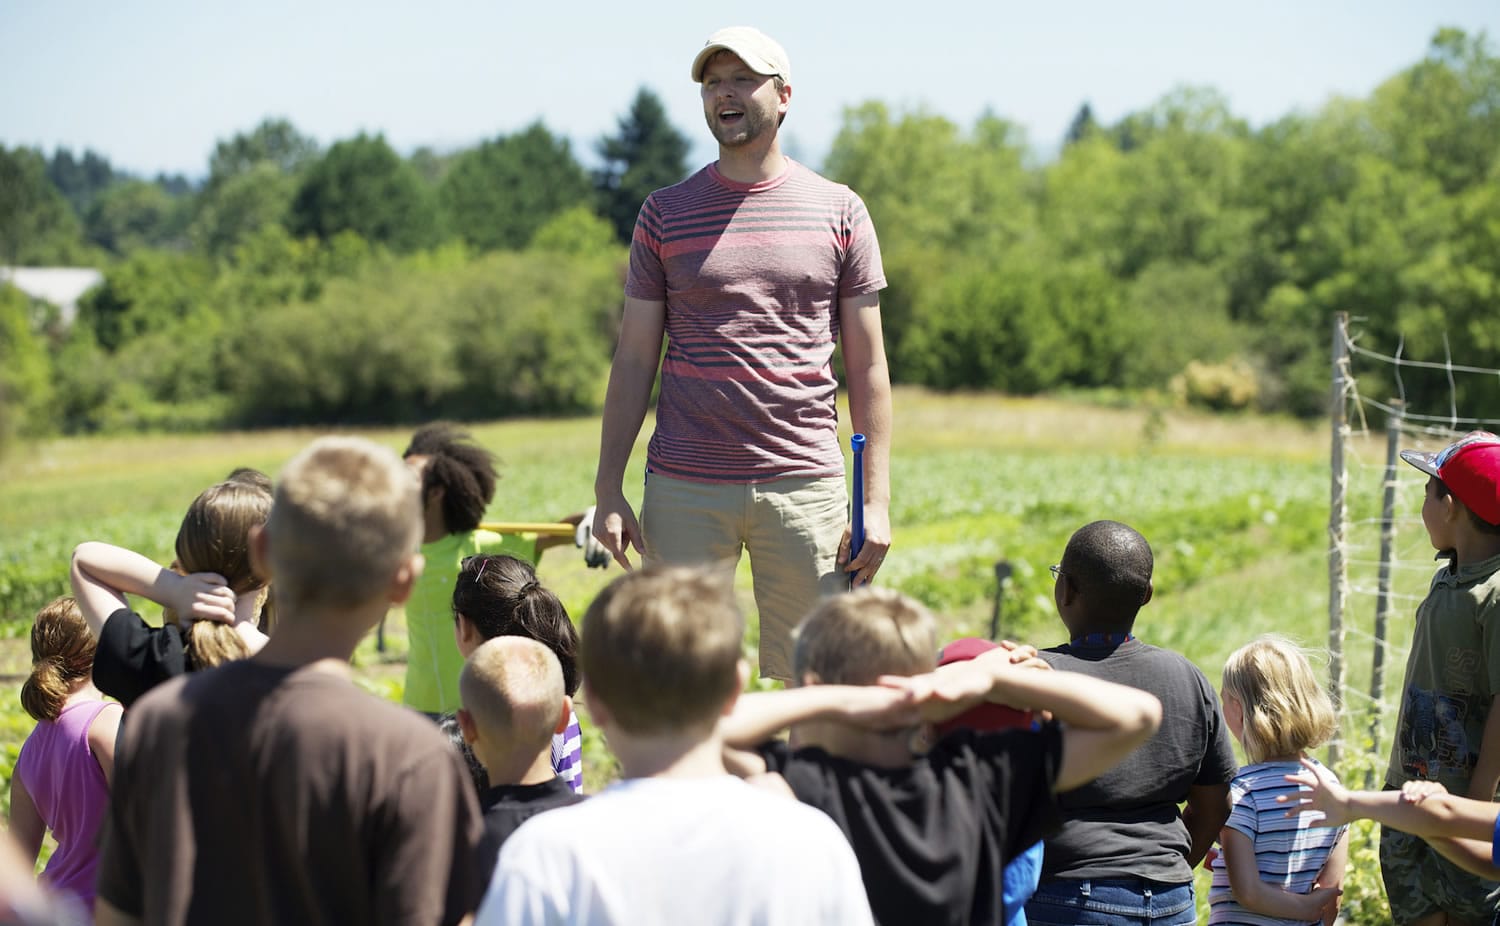 Erik Smith, who recently earned his master's degree in teaching from Washington State University Vancouver, serves as program coordinator for At Home At School.